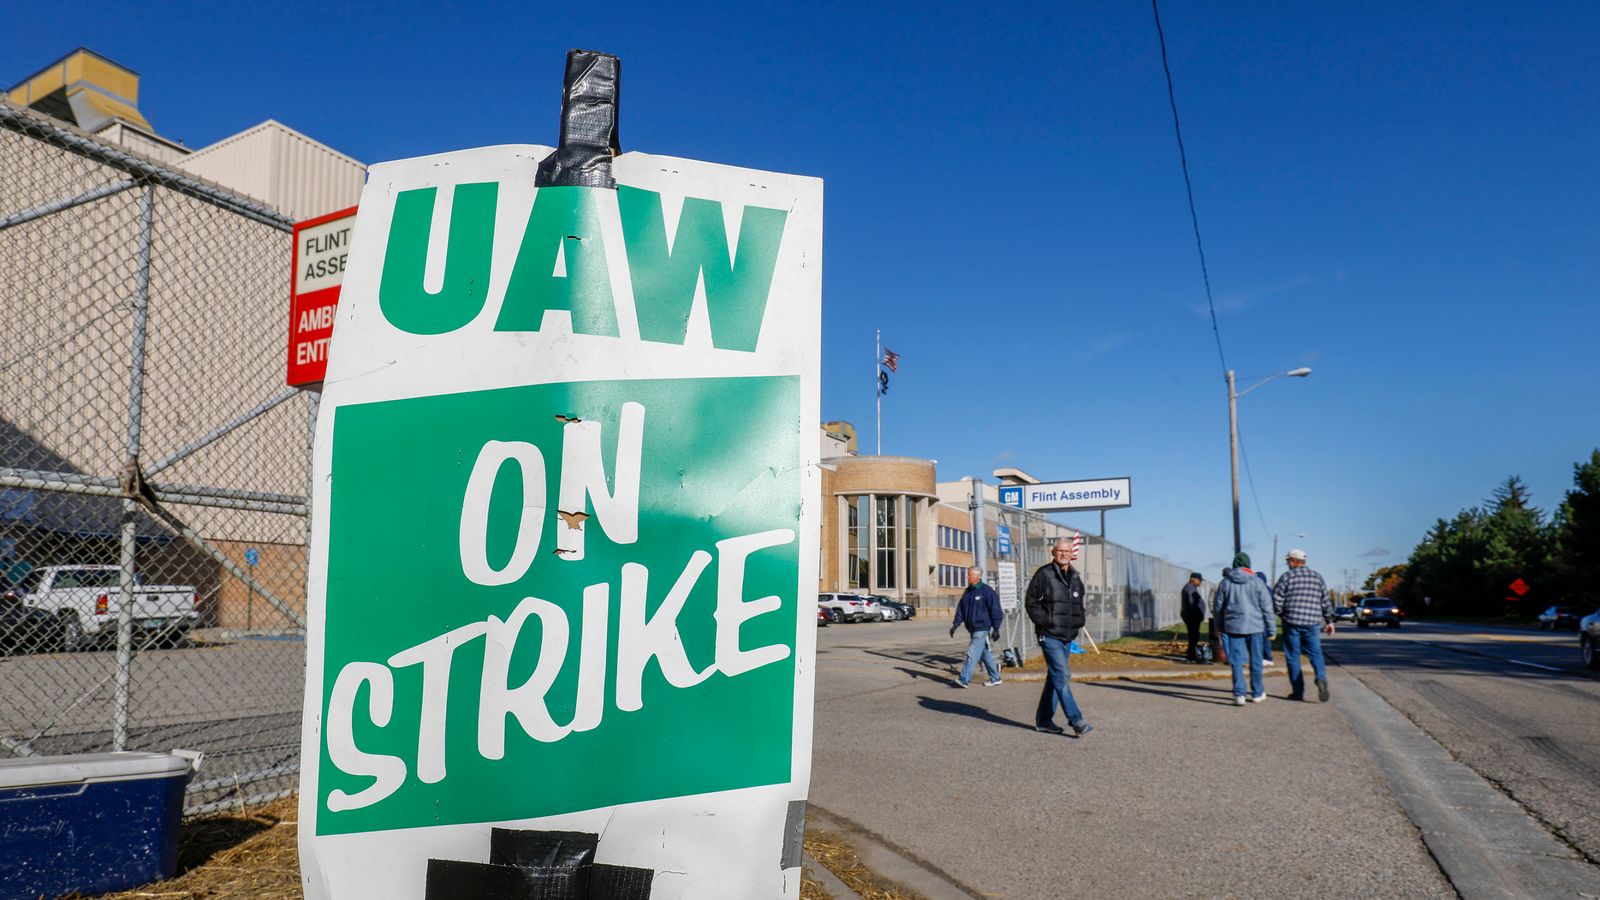 UAW union to launch coordinated strikes against General Motors, Ford and Stellantis | Business News